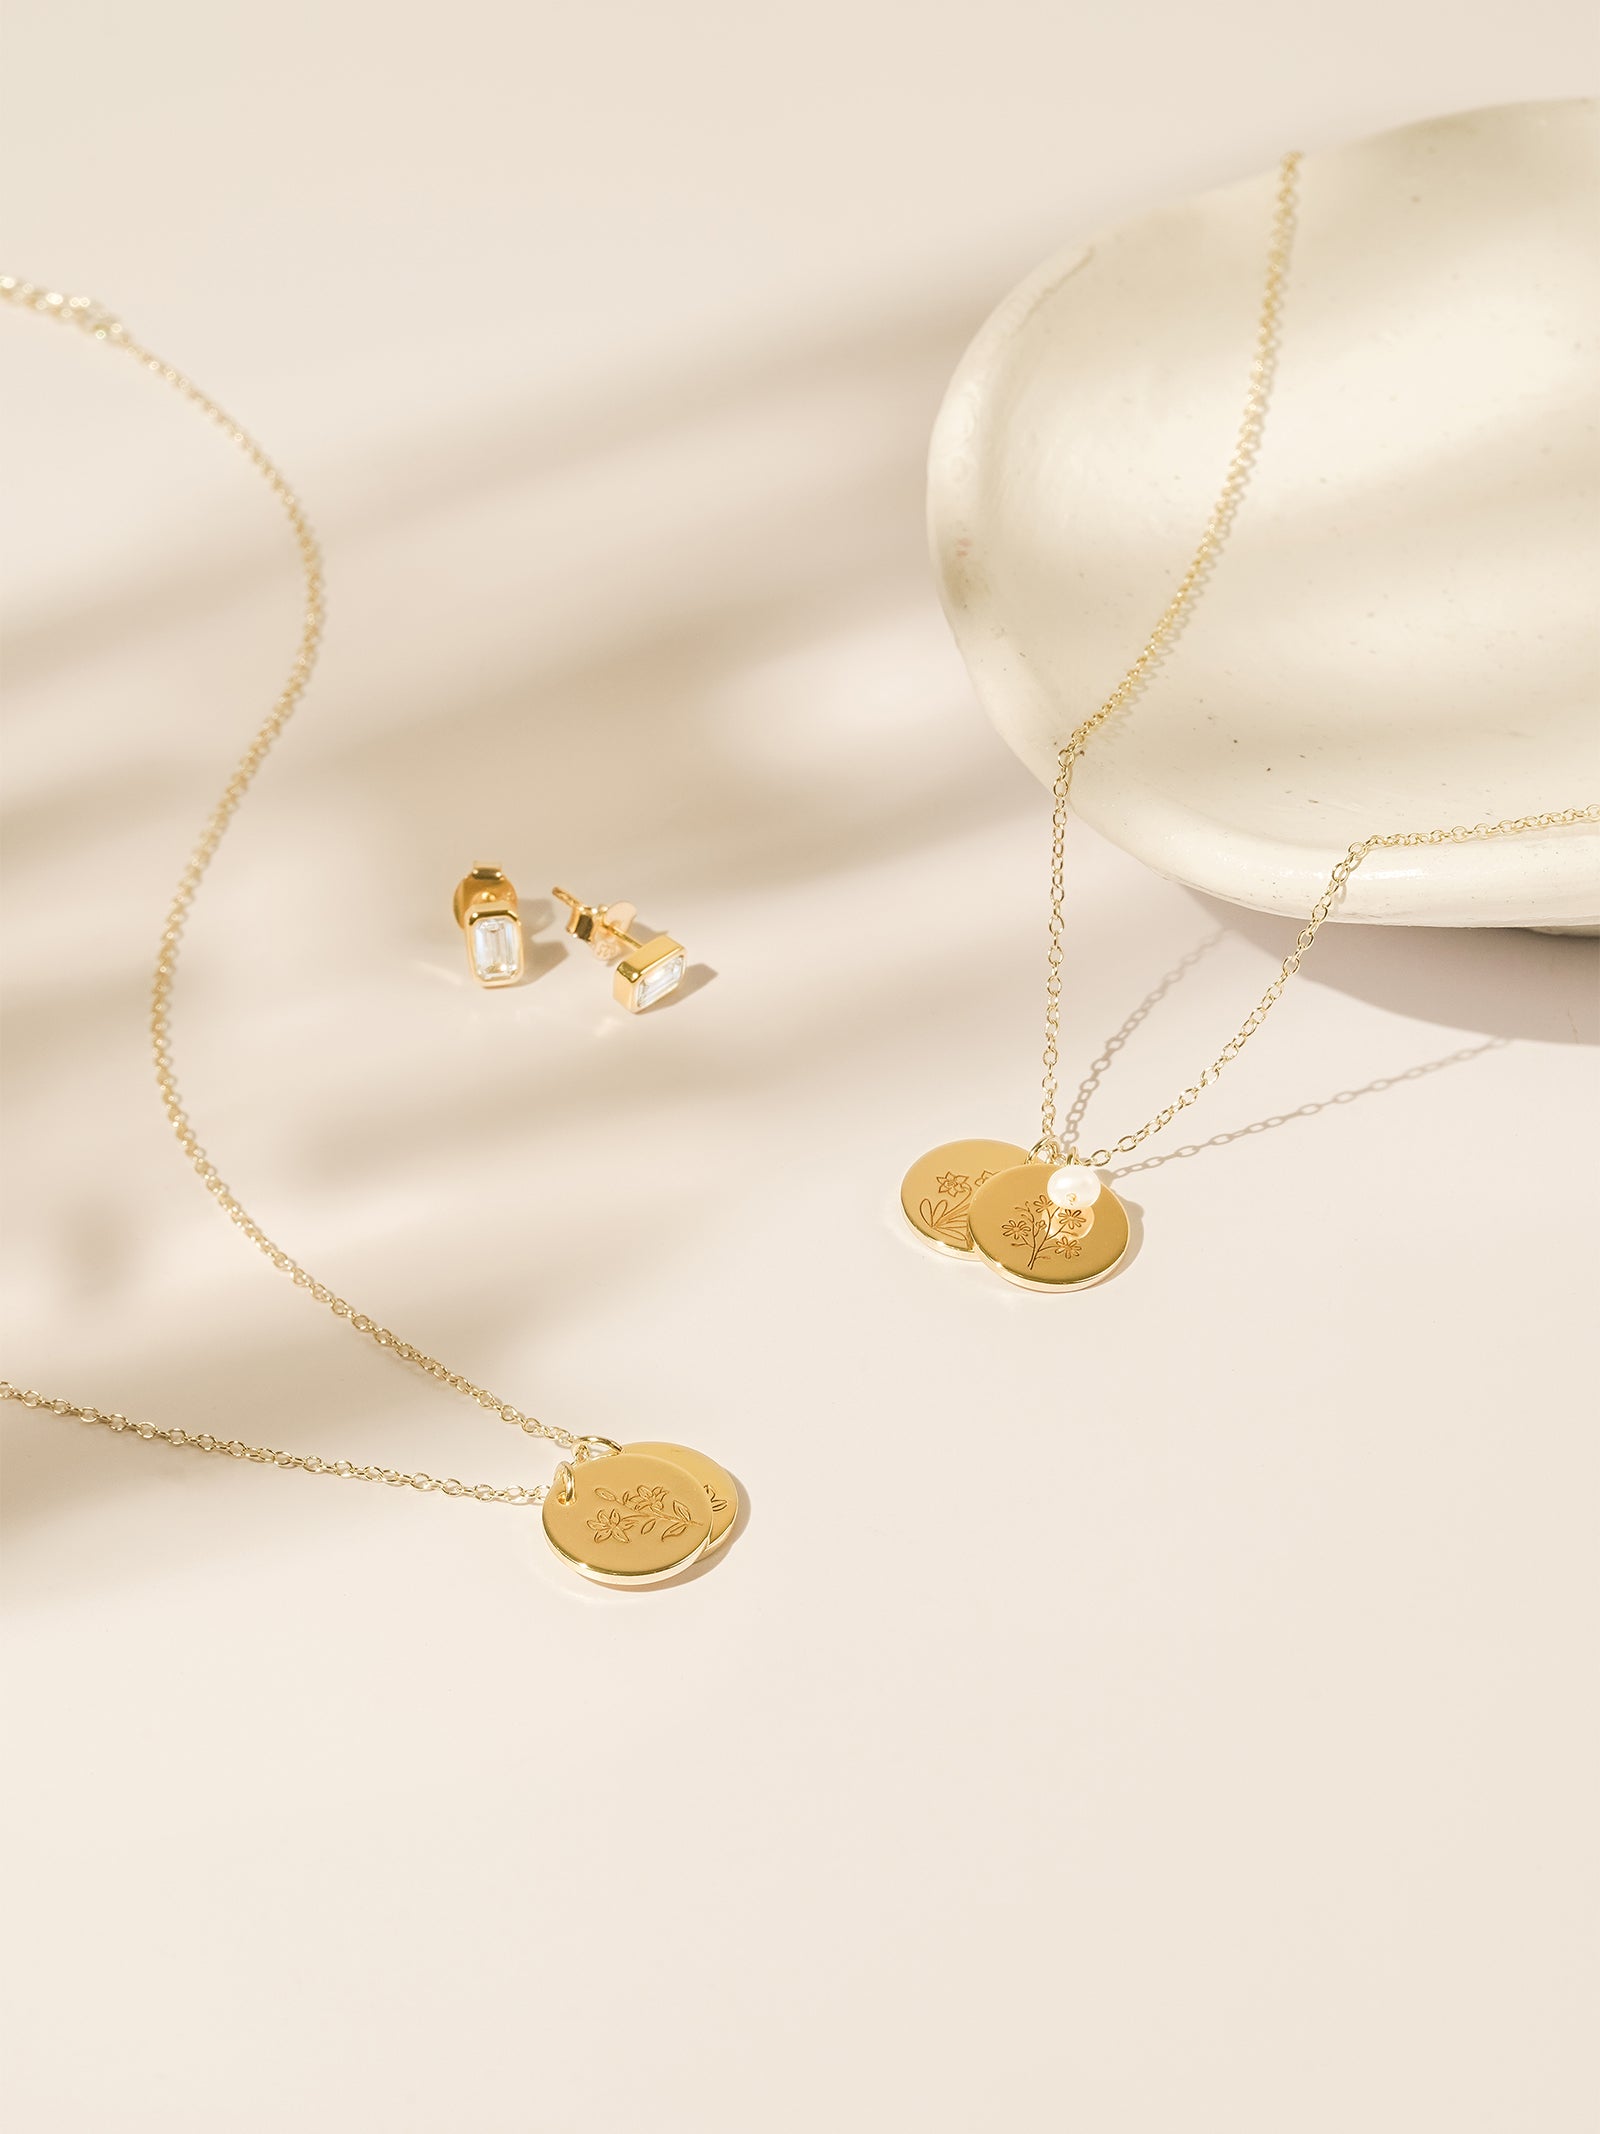 Tender Objects Fleur Layered Necklace - Customizable birthflower charms, pearls, and gold-plated hearts for a chic and personalized look.